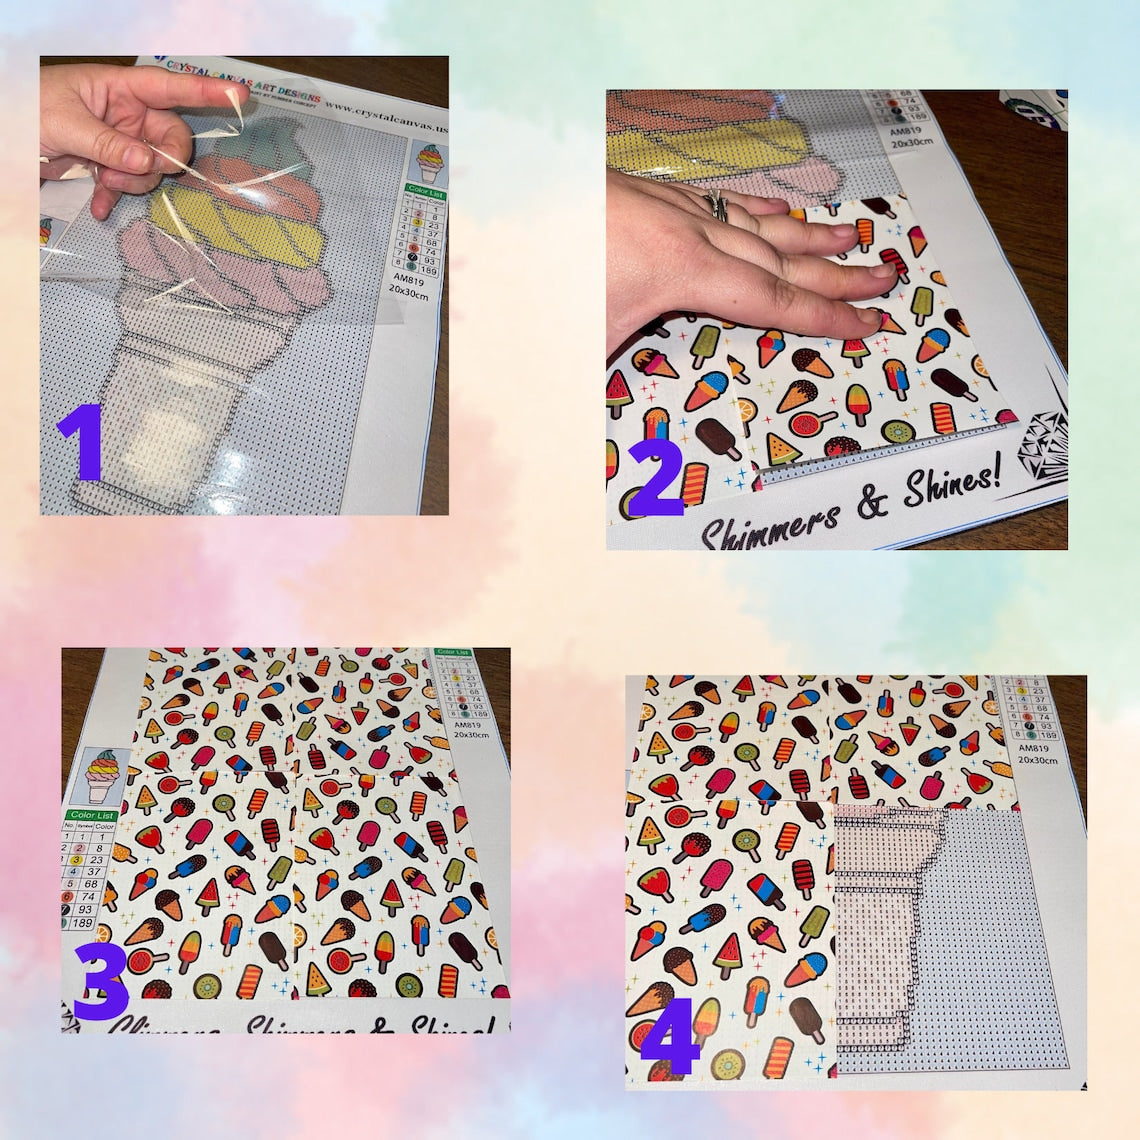 How To Make Your Own Diamond Painting Cover/Release Papers